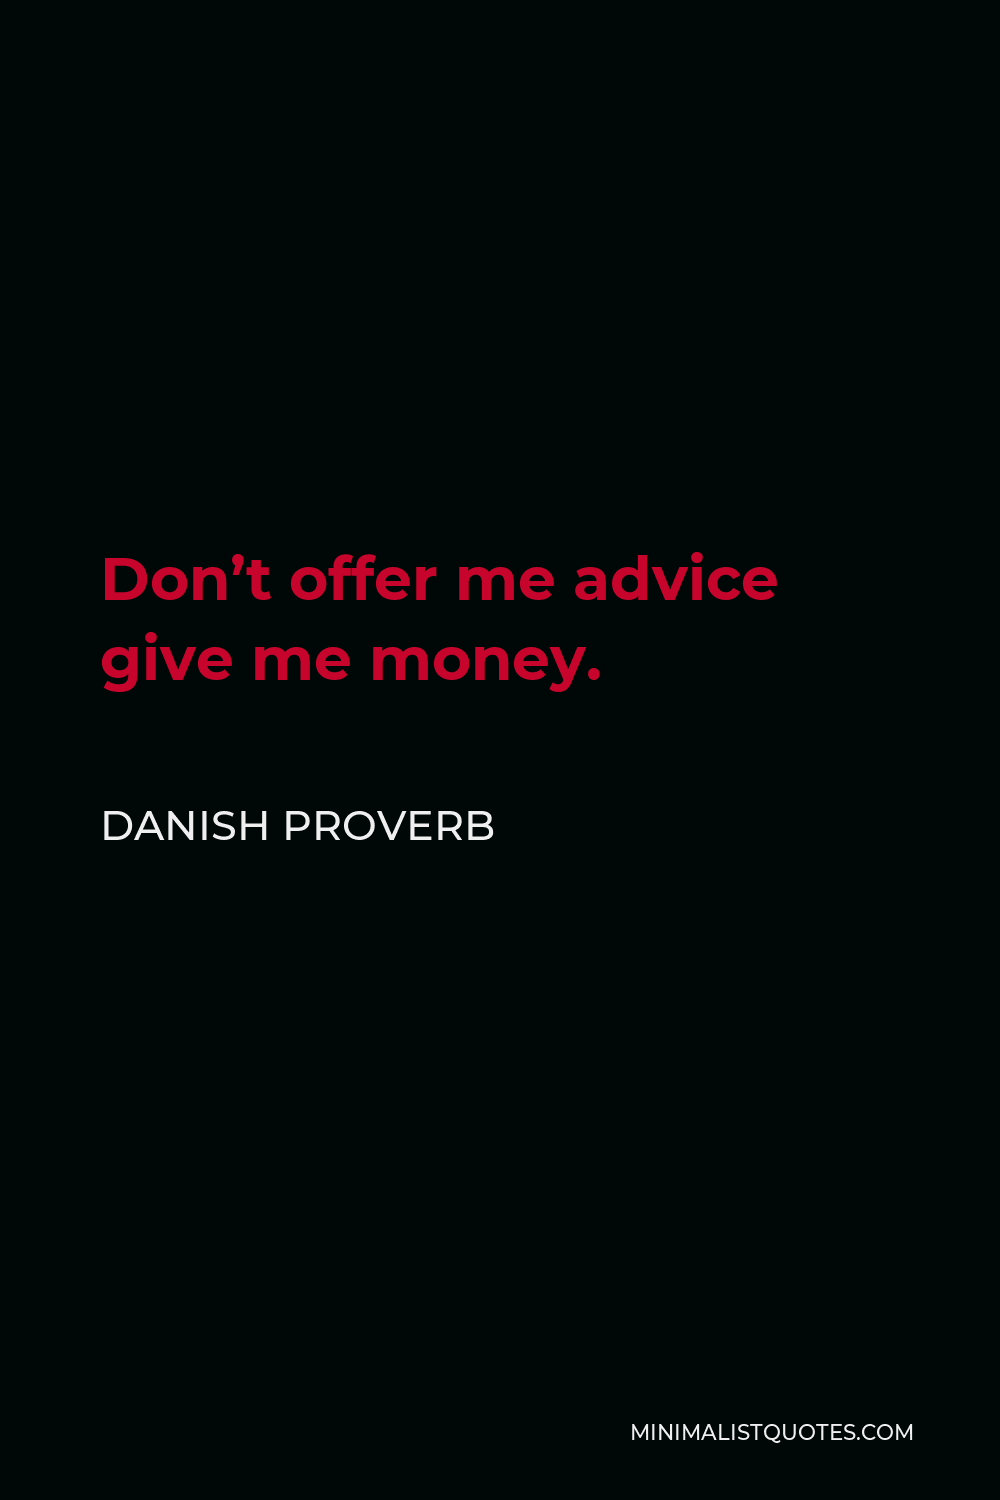 Danish Proverb Quote - Don’t offer me advice give me money.